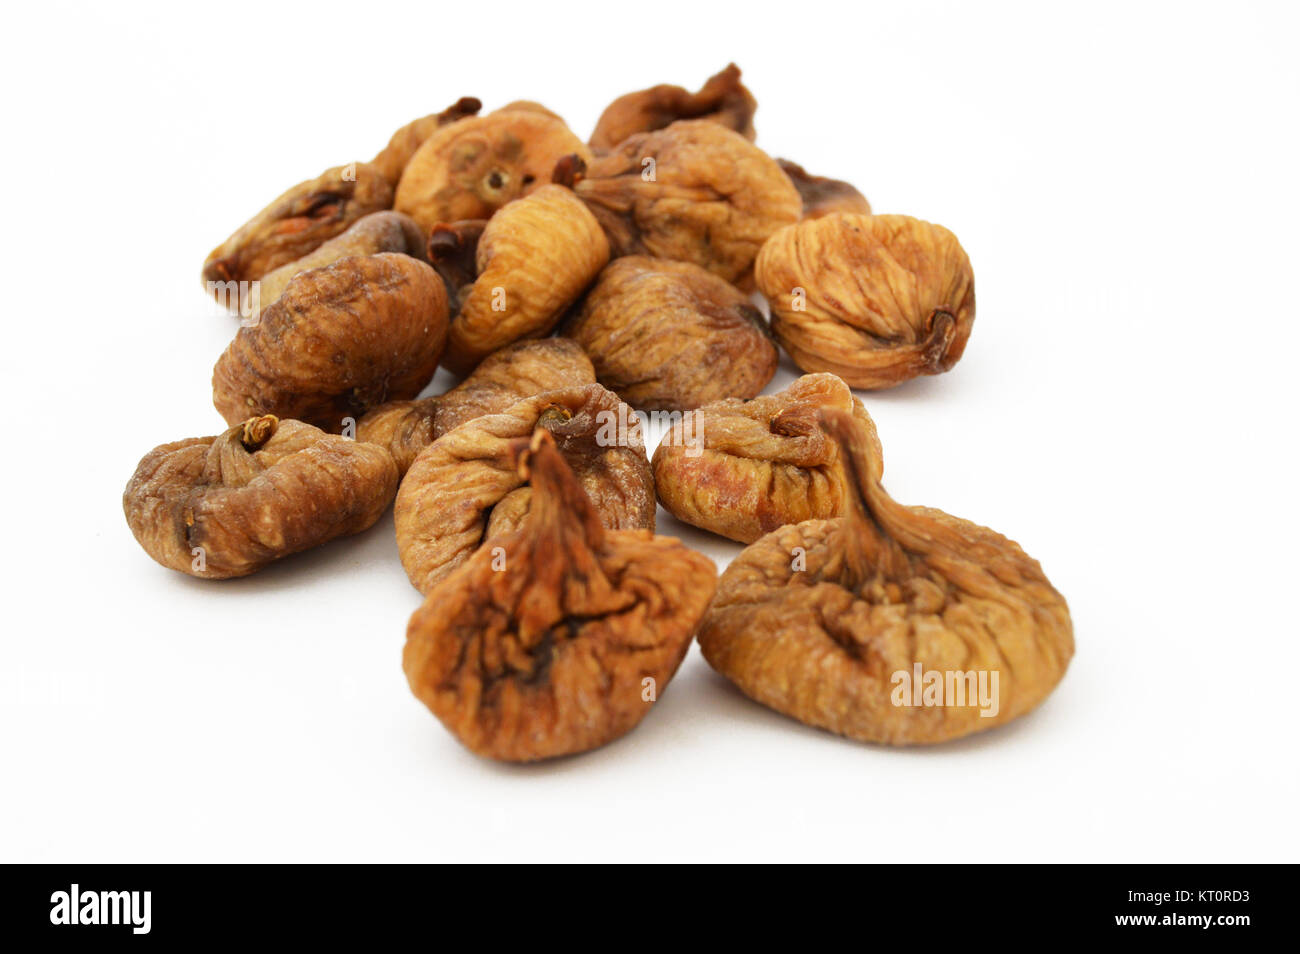 Dried fig pictures Stock Photo